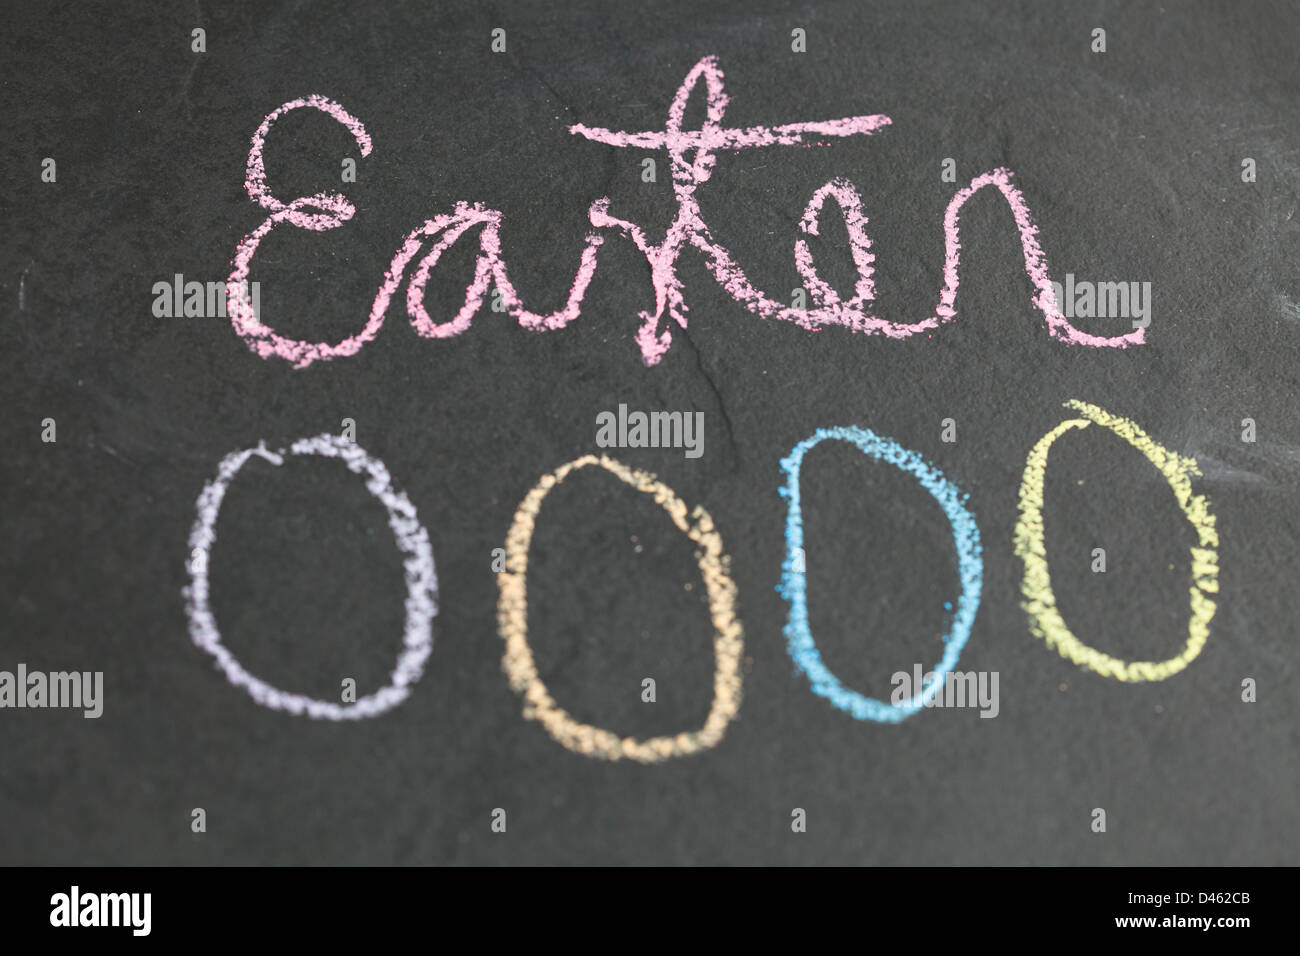 Closeup of four Easter egg shaped chalk drawings and text on dark background Stock Photo